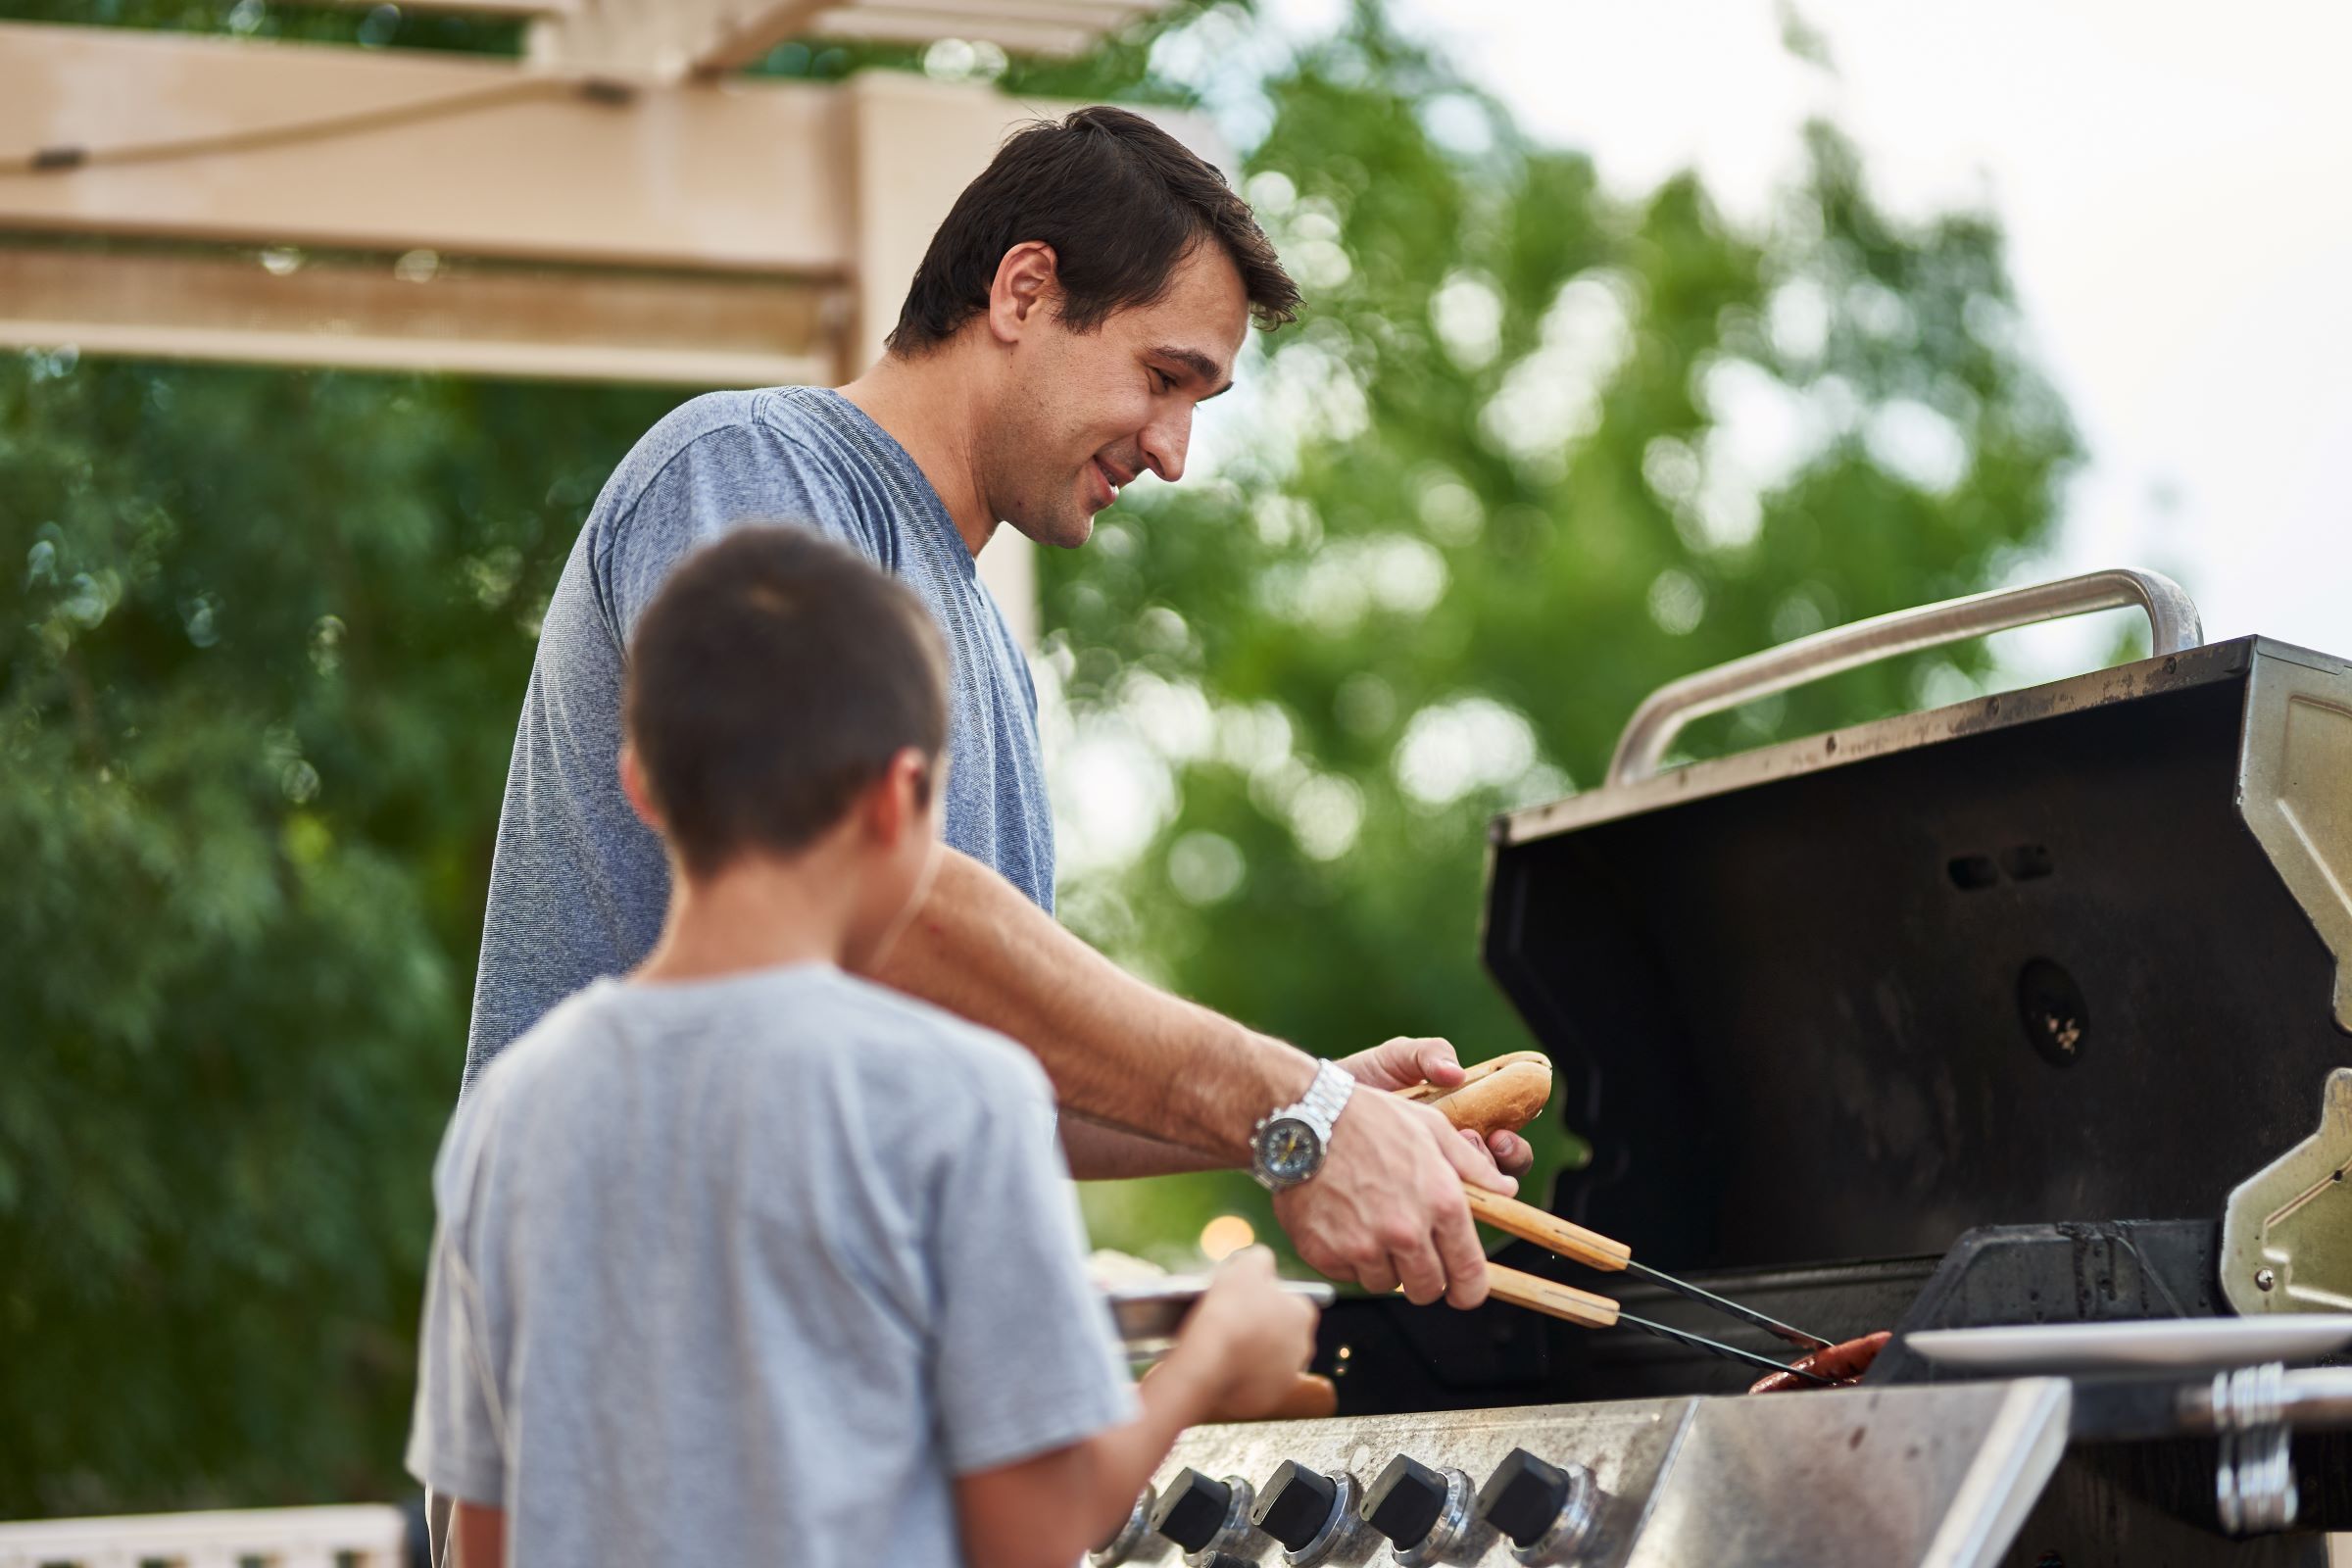 Father And Son Grilling Hot Dogs Together In Backyard